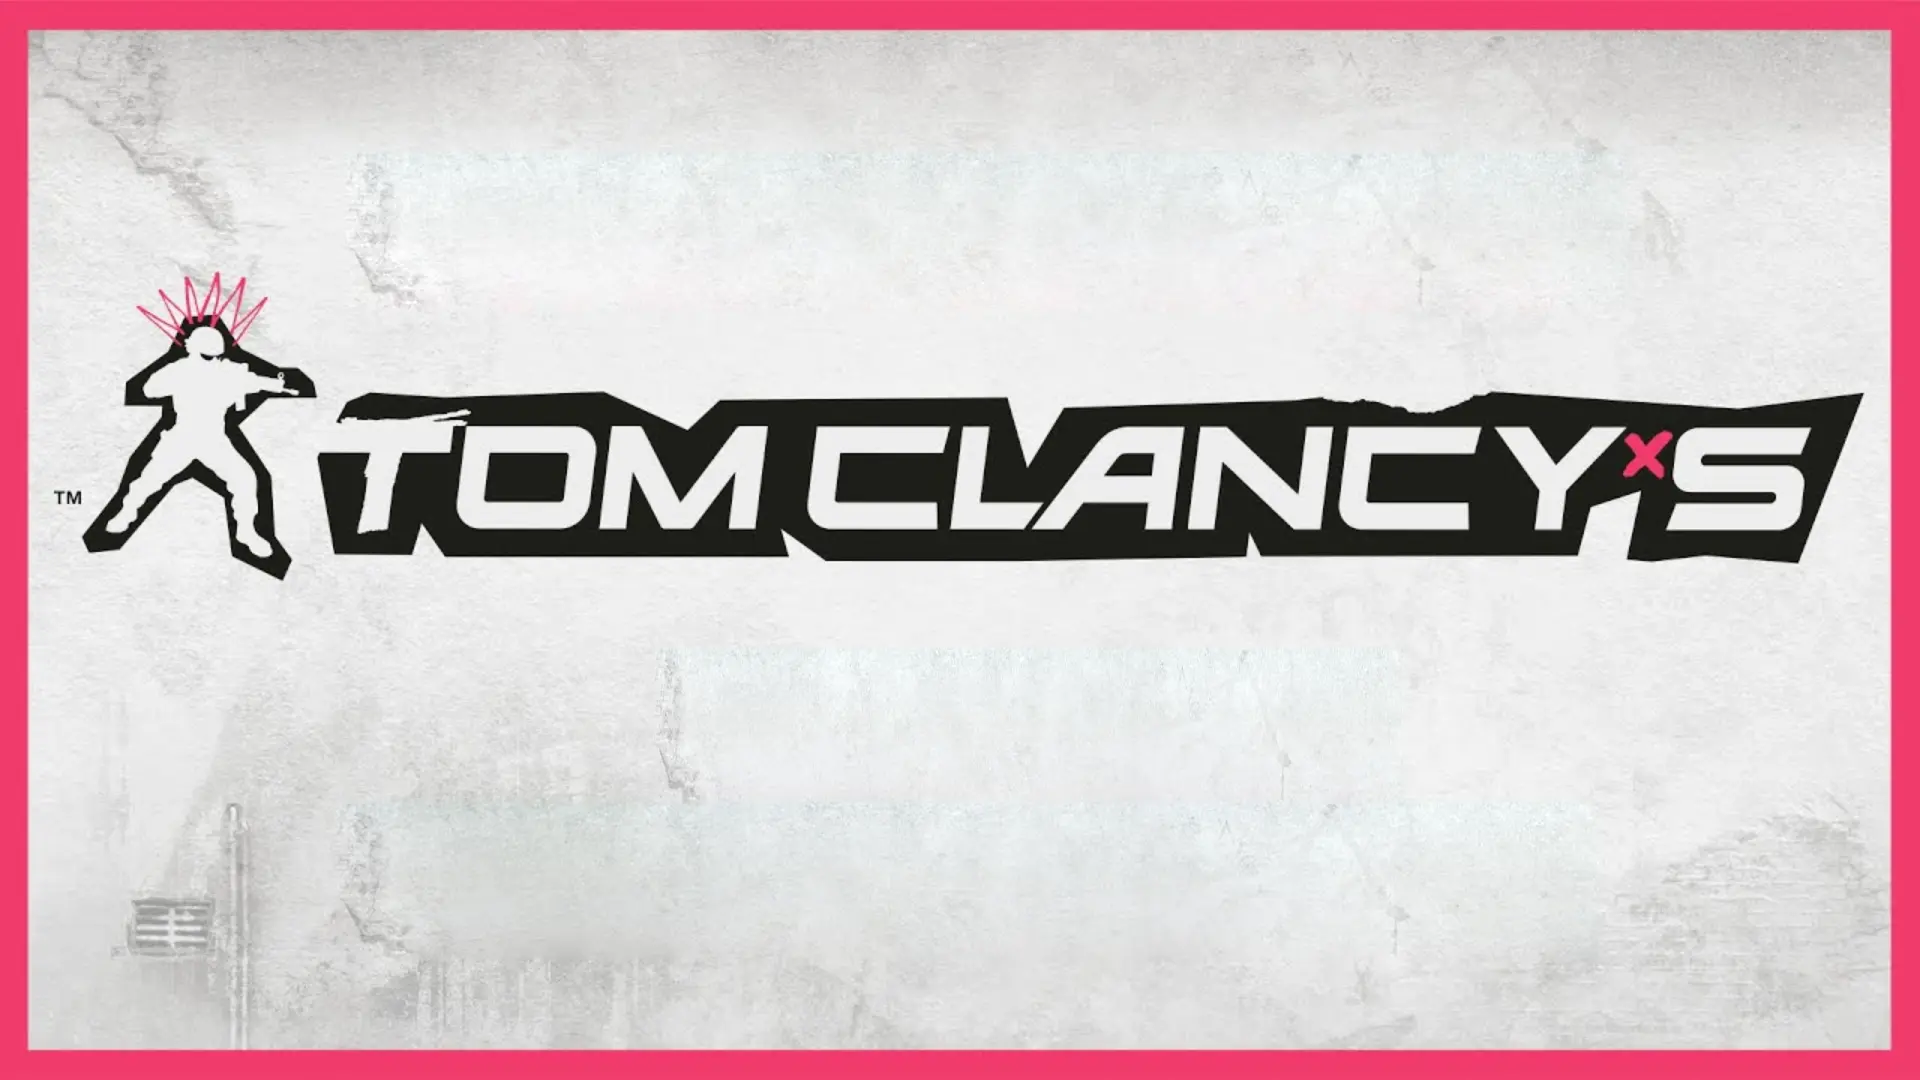 New Tom Clancy Game Gameplay